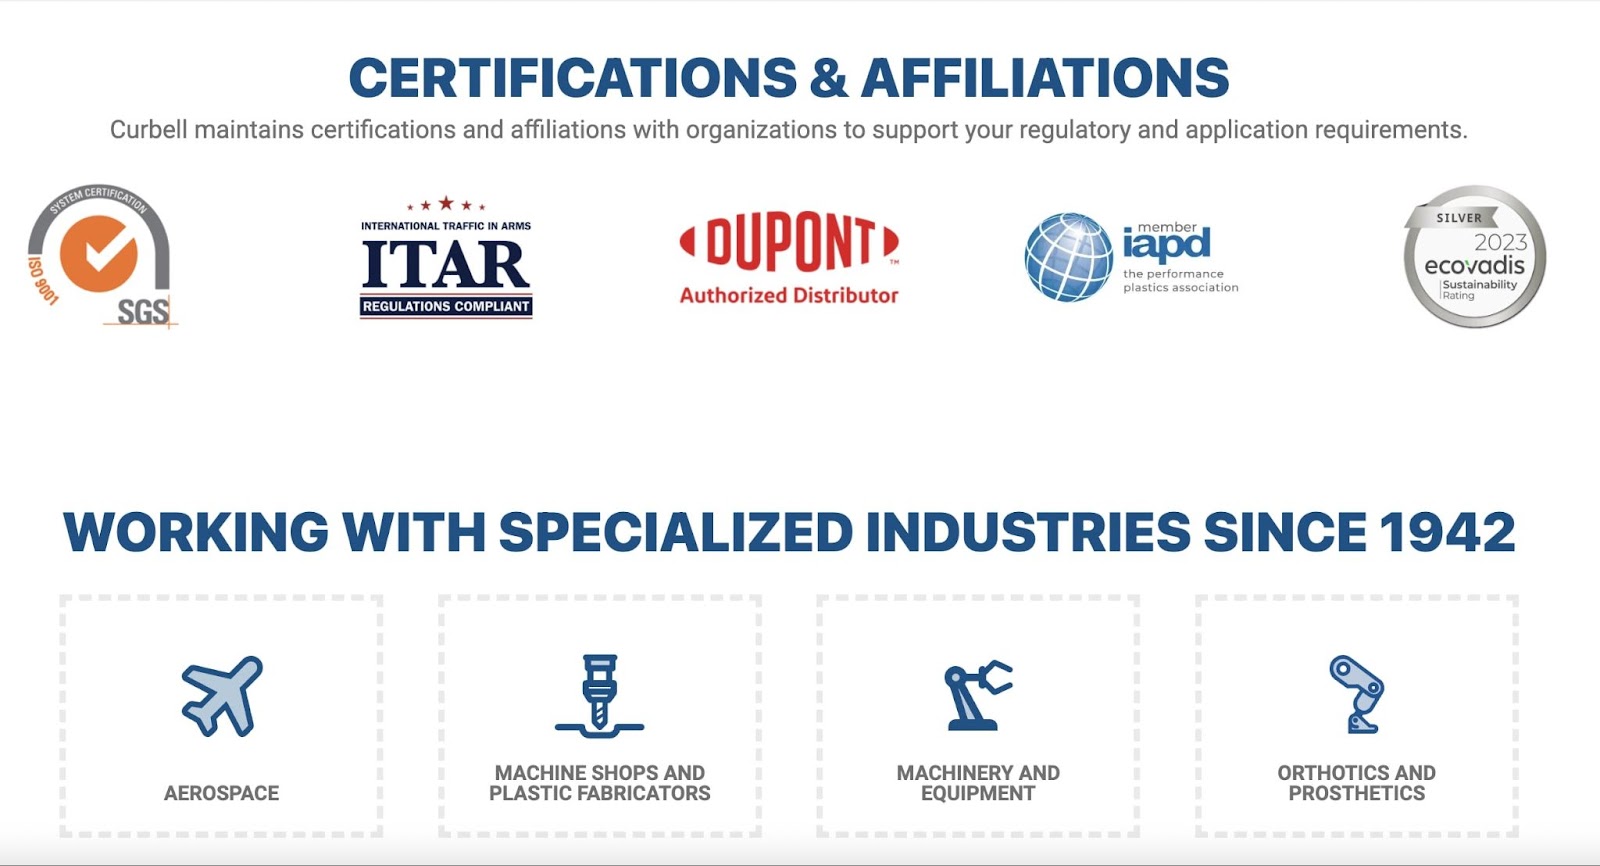 Certifications & affiliations connected  Curbell Plastics' homepage